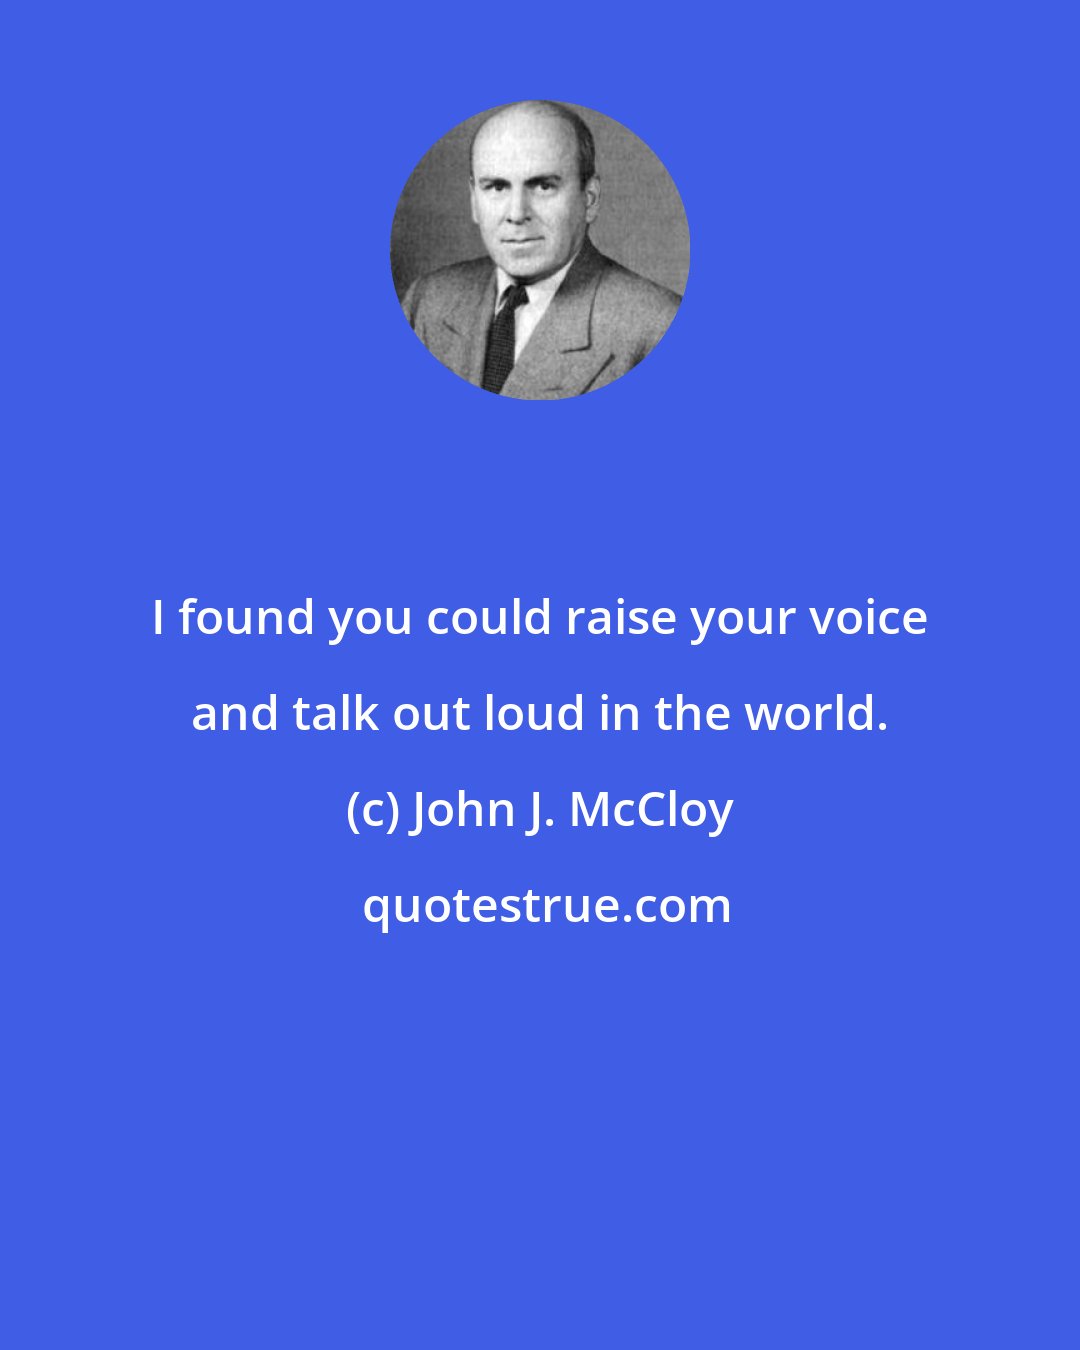 John J. McCloy: I found you could raise your voice and talk out loud in the world.